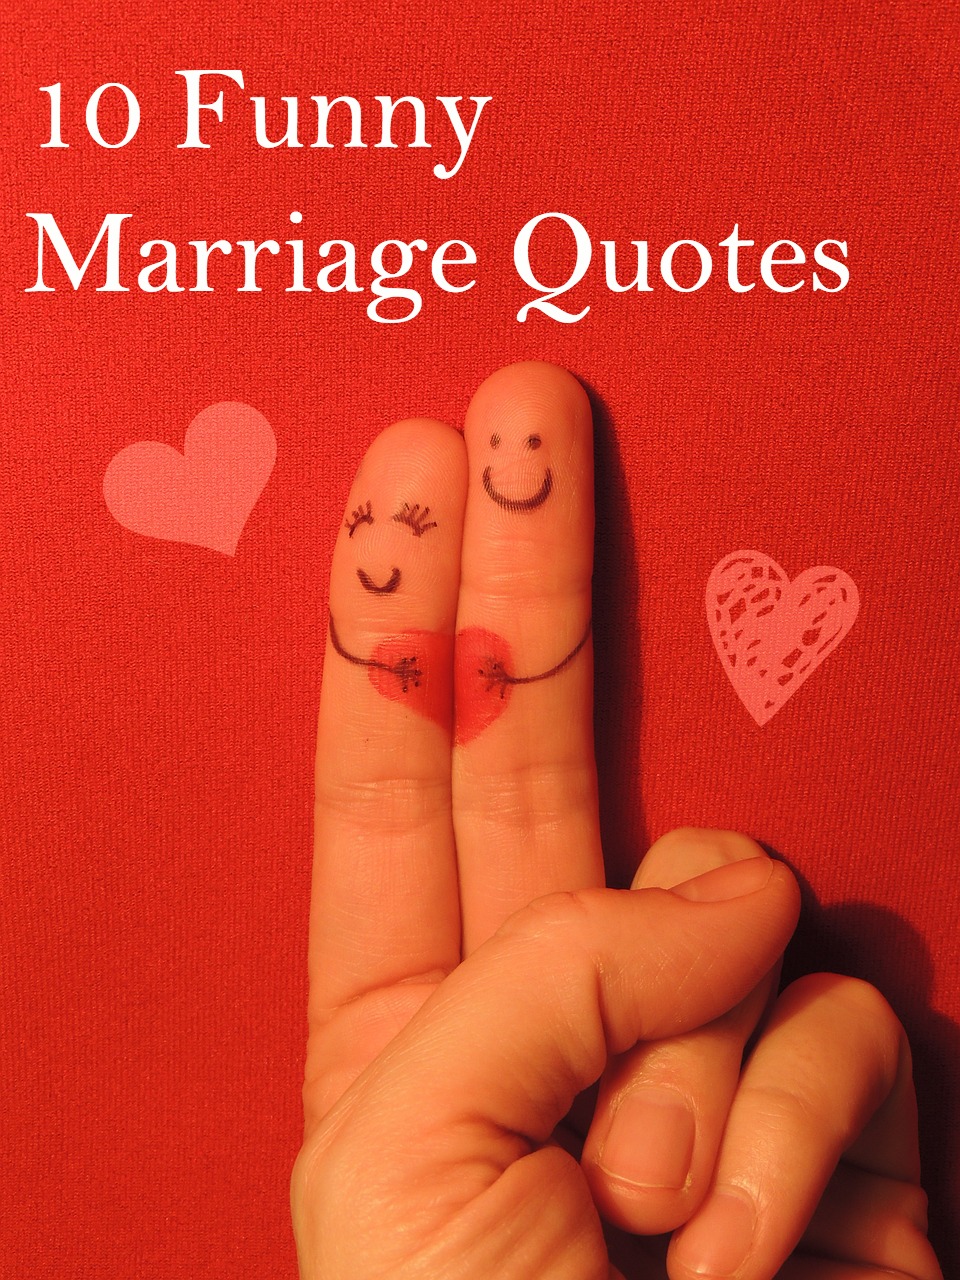 Funny Marriage Quotes - Wifely Steps